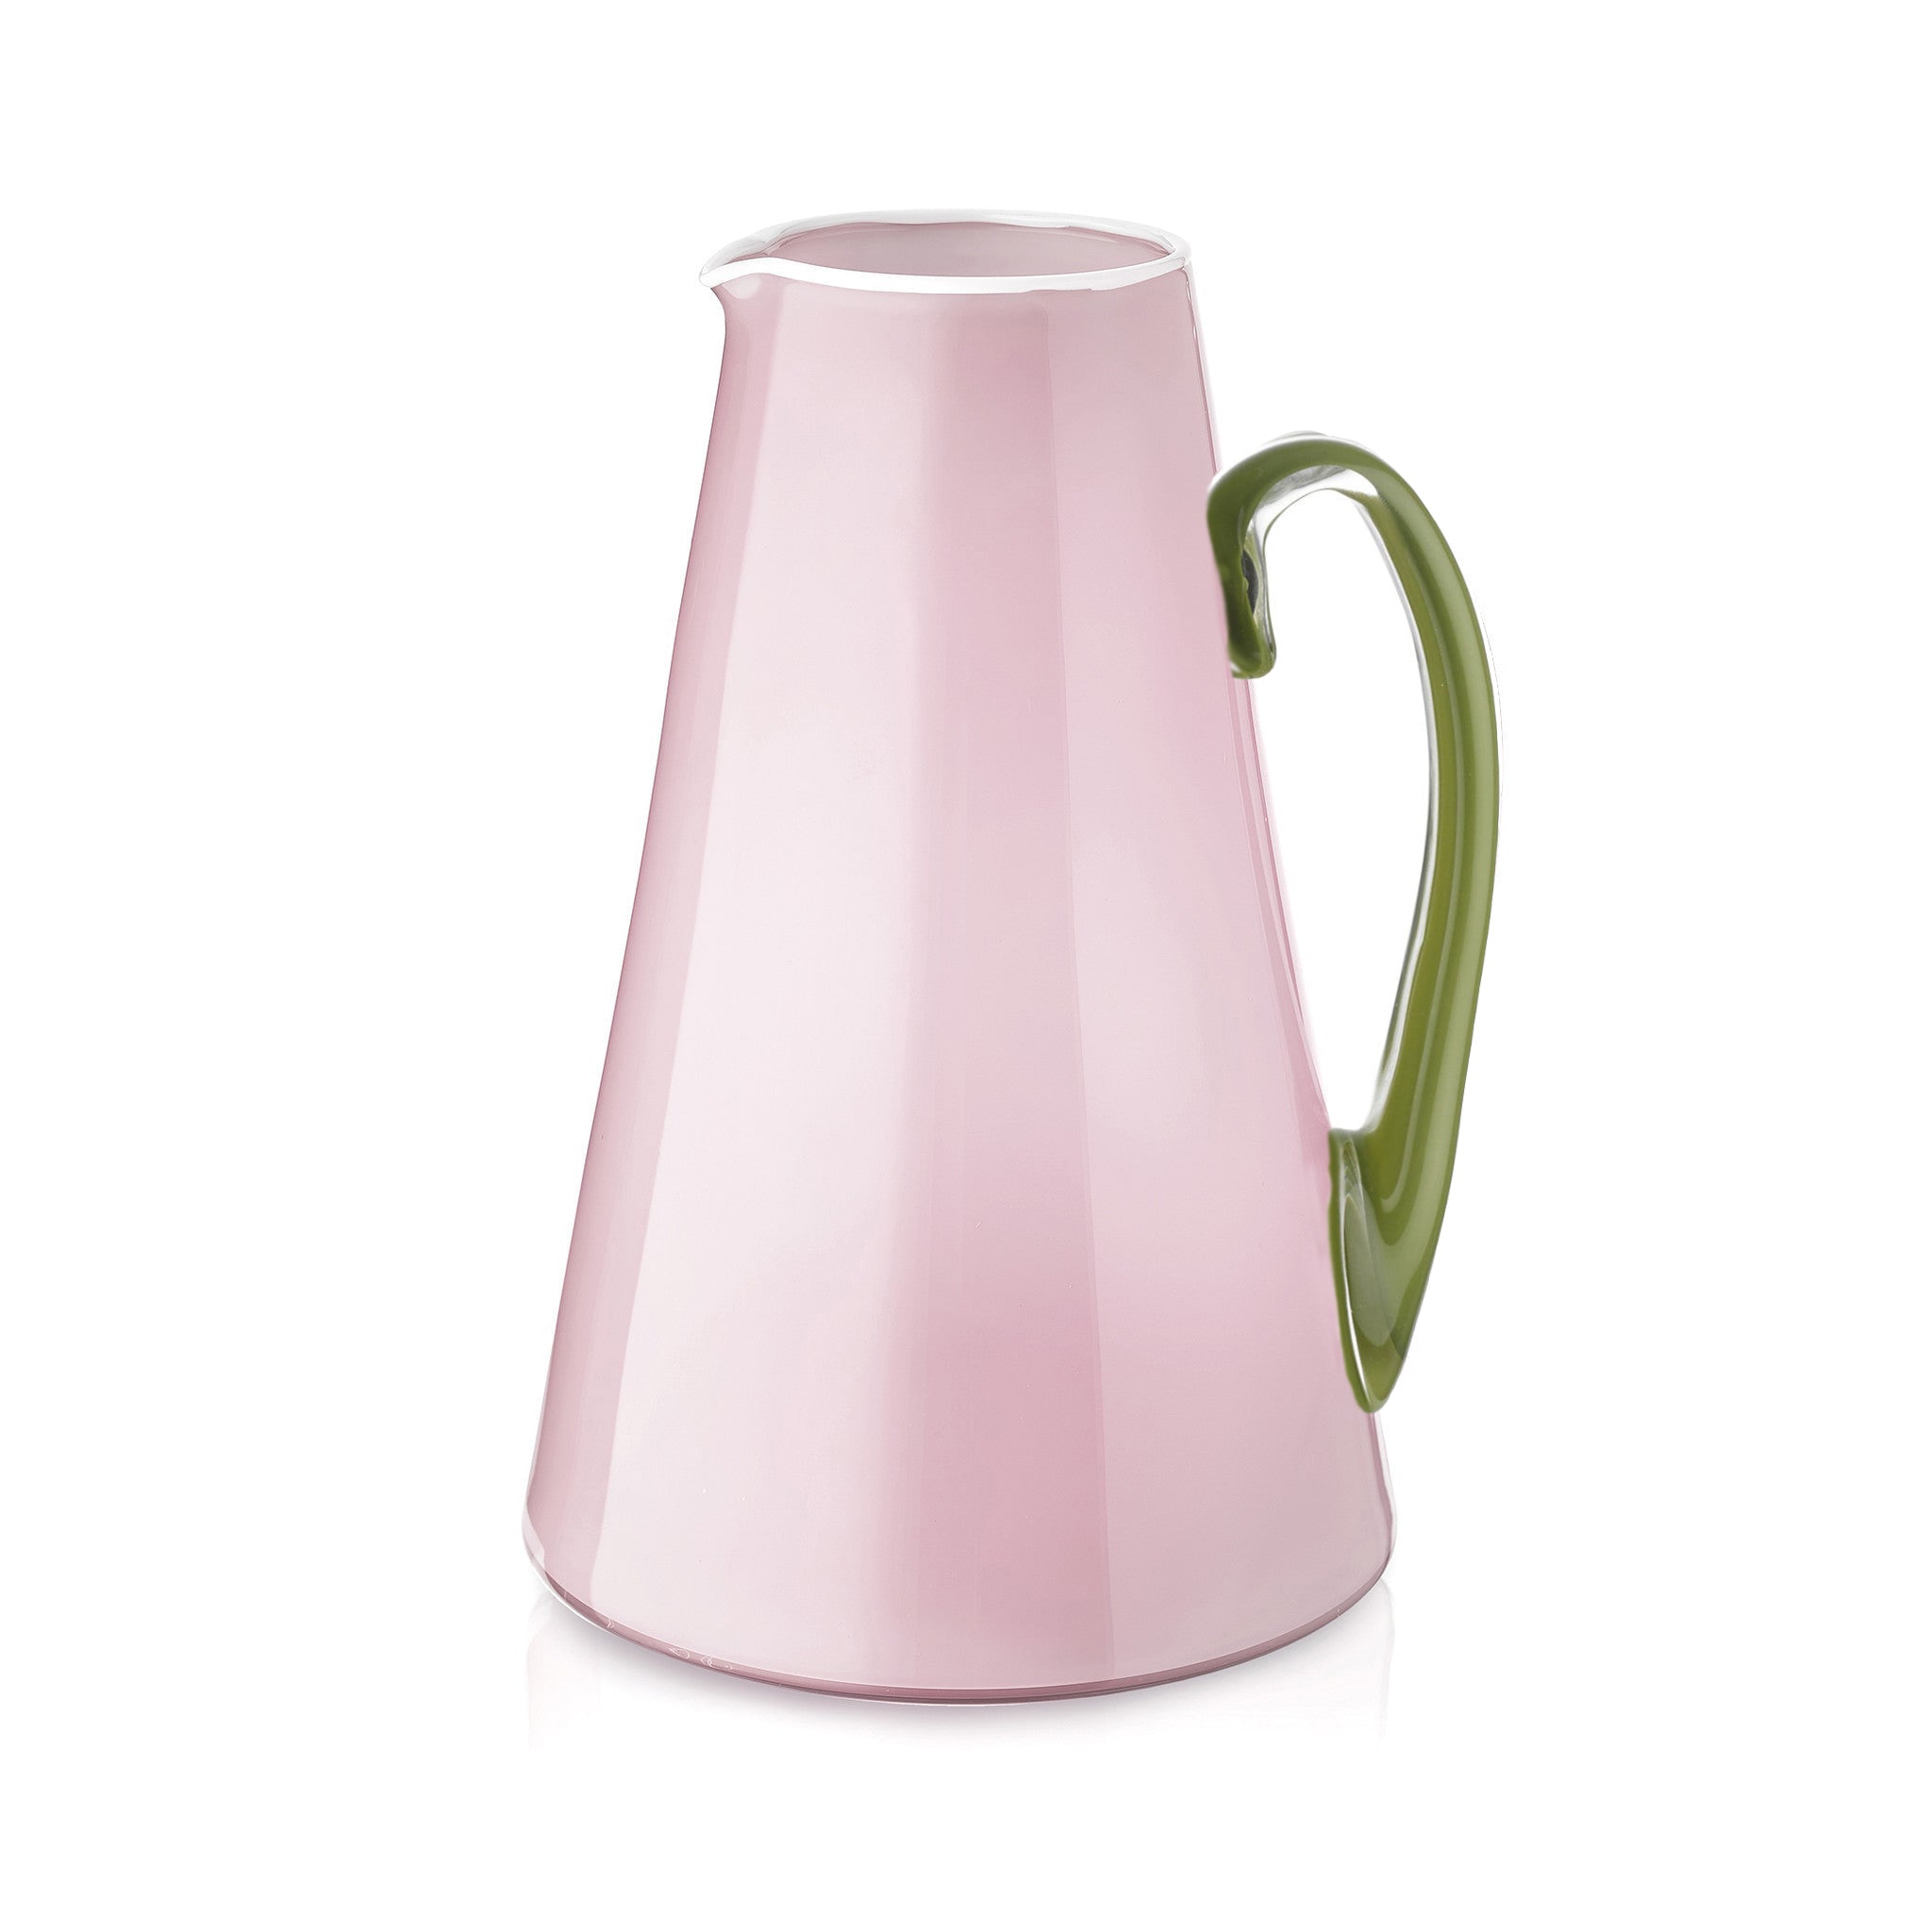 Handblown Glass Bumba Jug in Rose Pink and Apple Green, 3lt